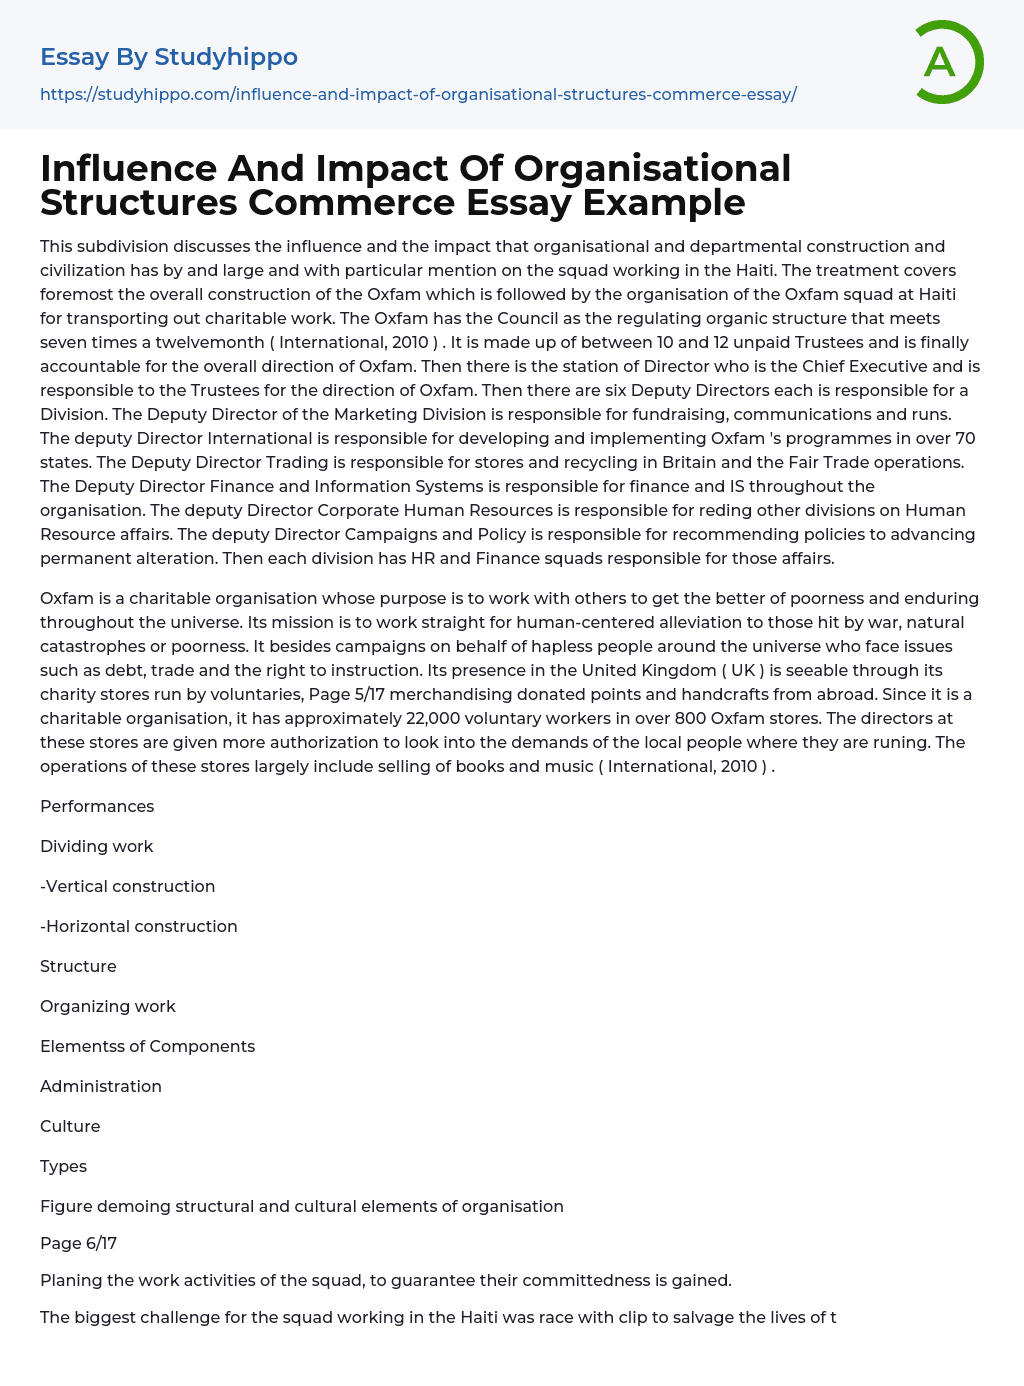 Influence And Impact Of Organisational Structures Commerce Essay Example